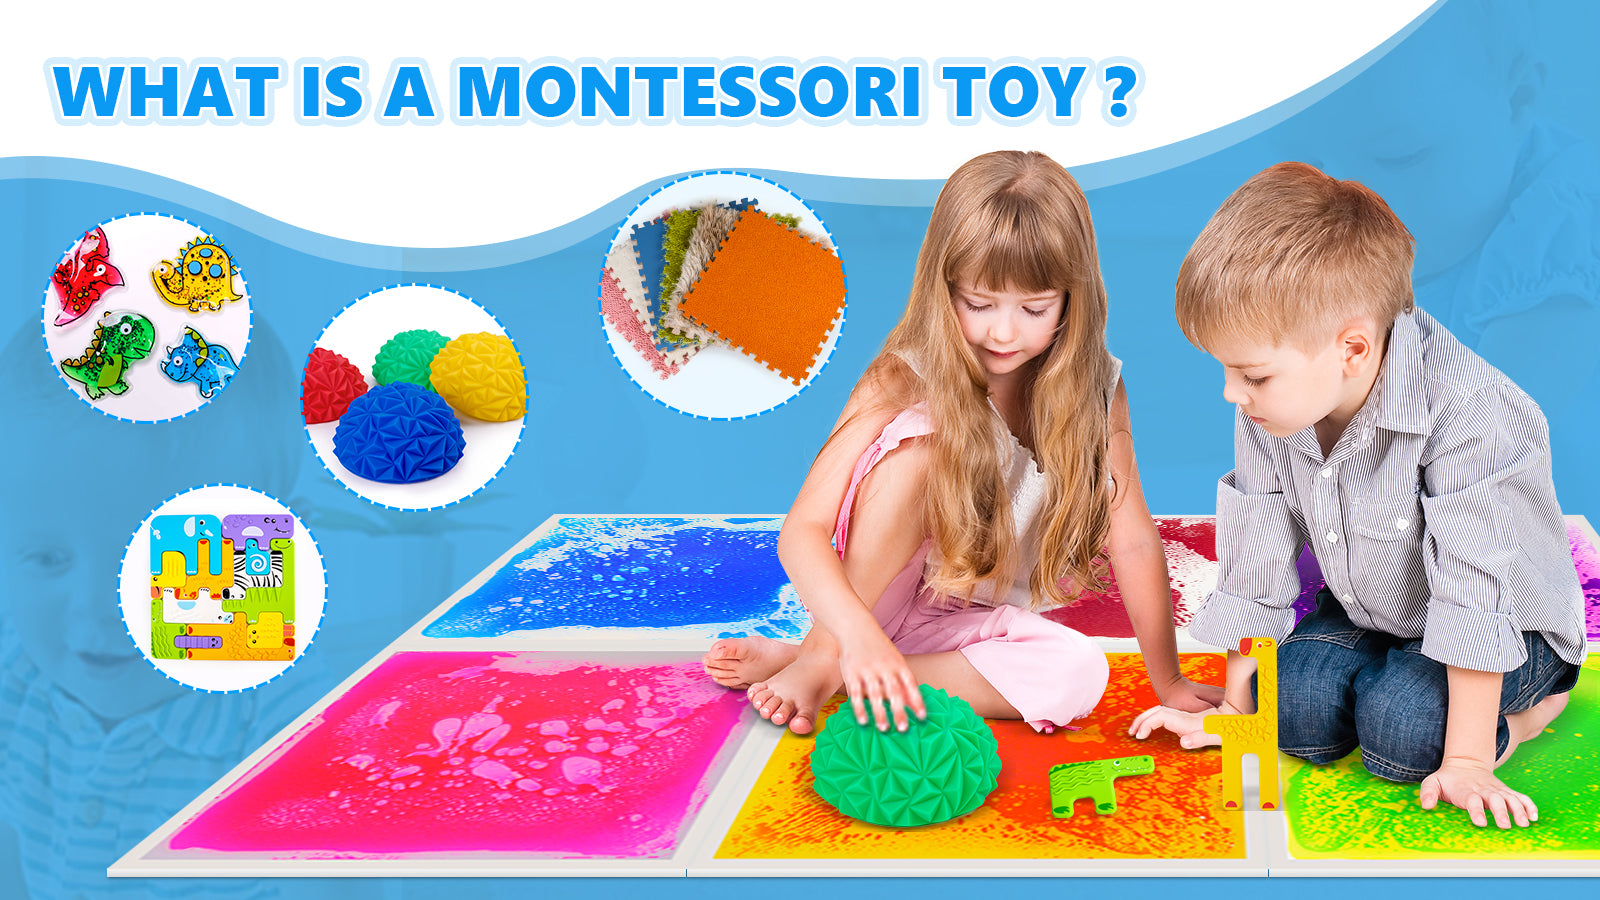 WHAT IS A MONTESSORI TOY ?